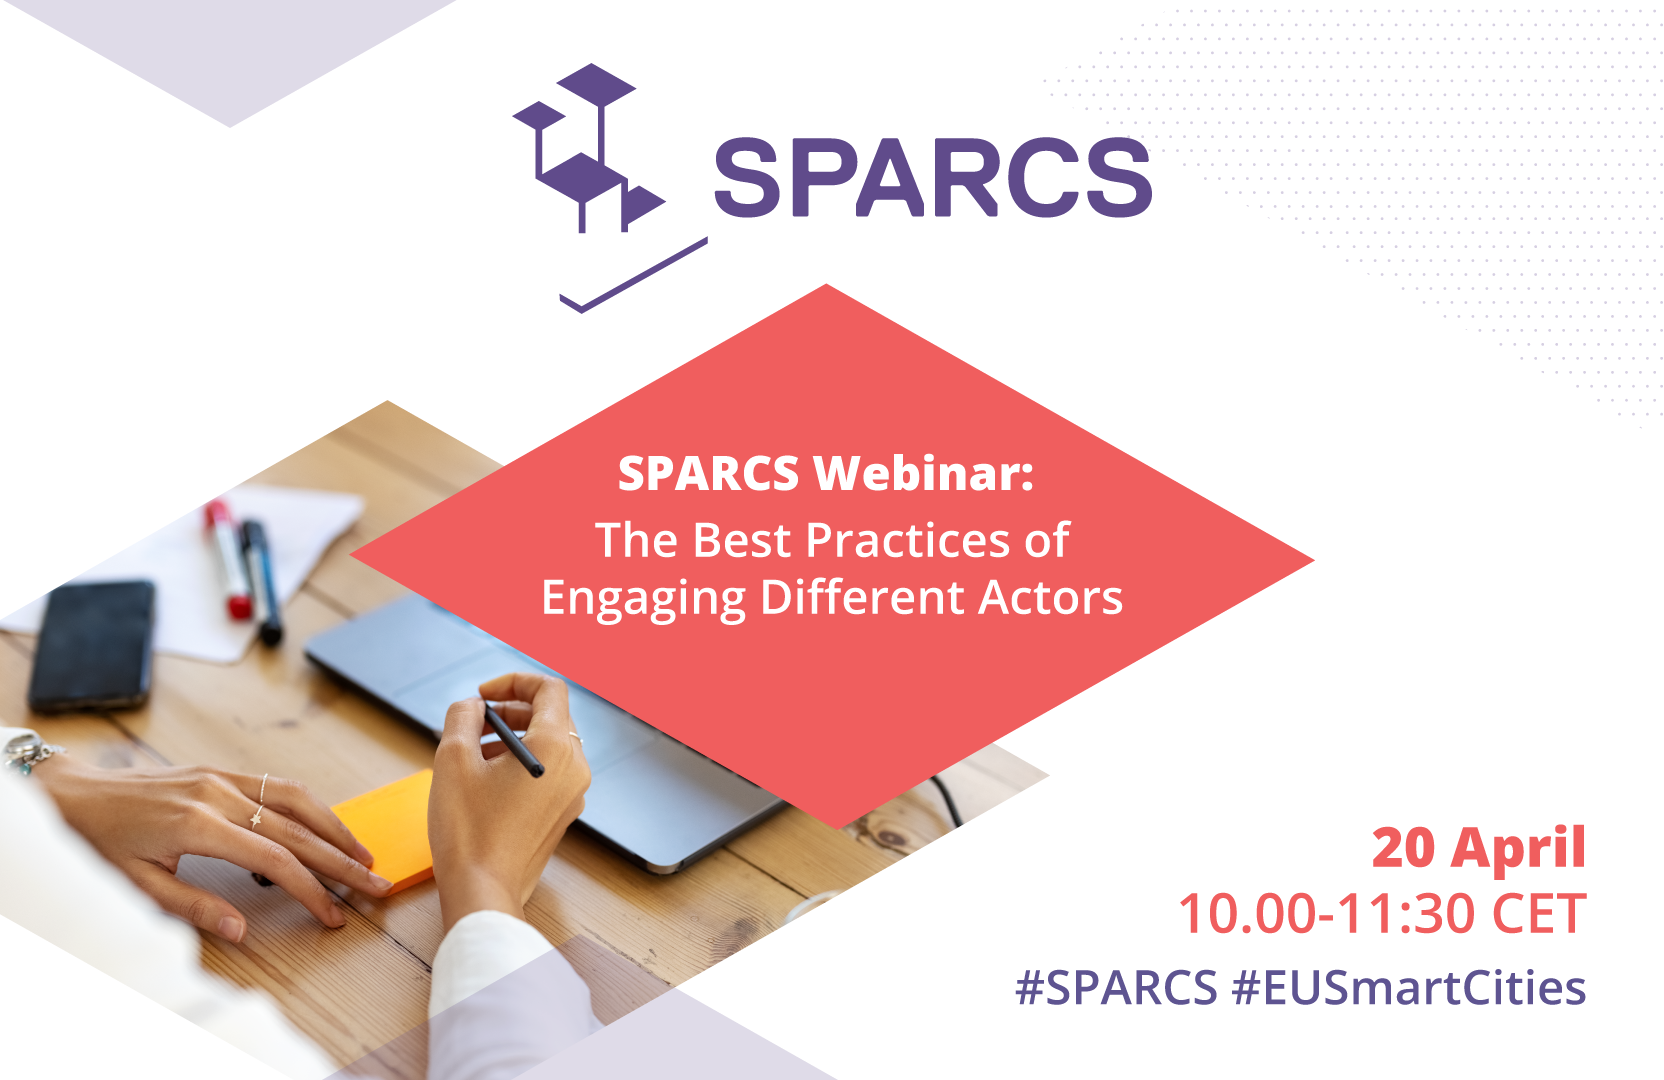 SPARCS WEBINAR: The Best Practices of Engaging Different Actors